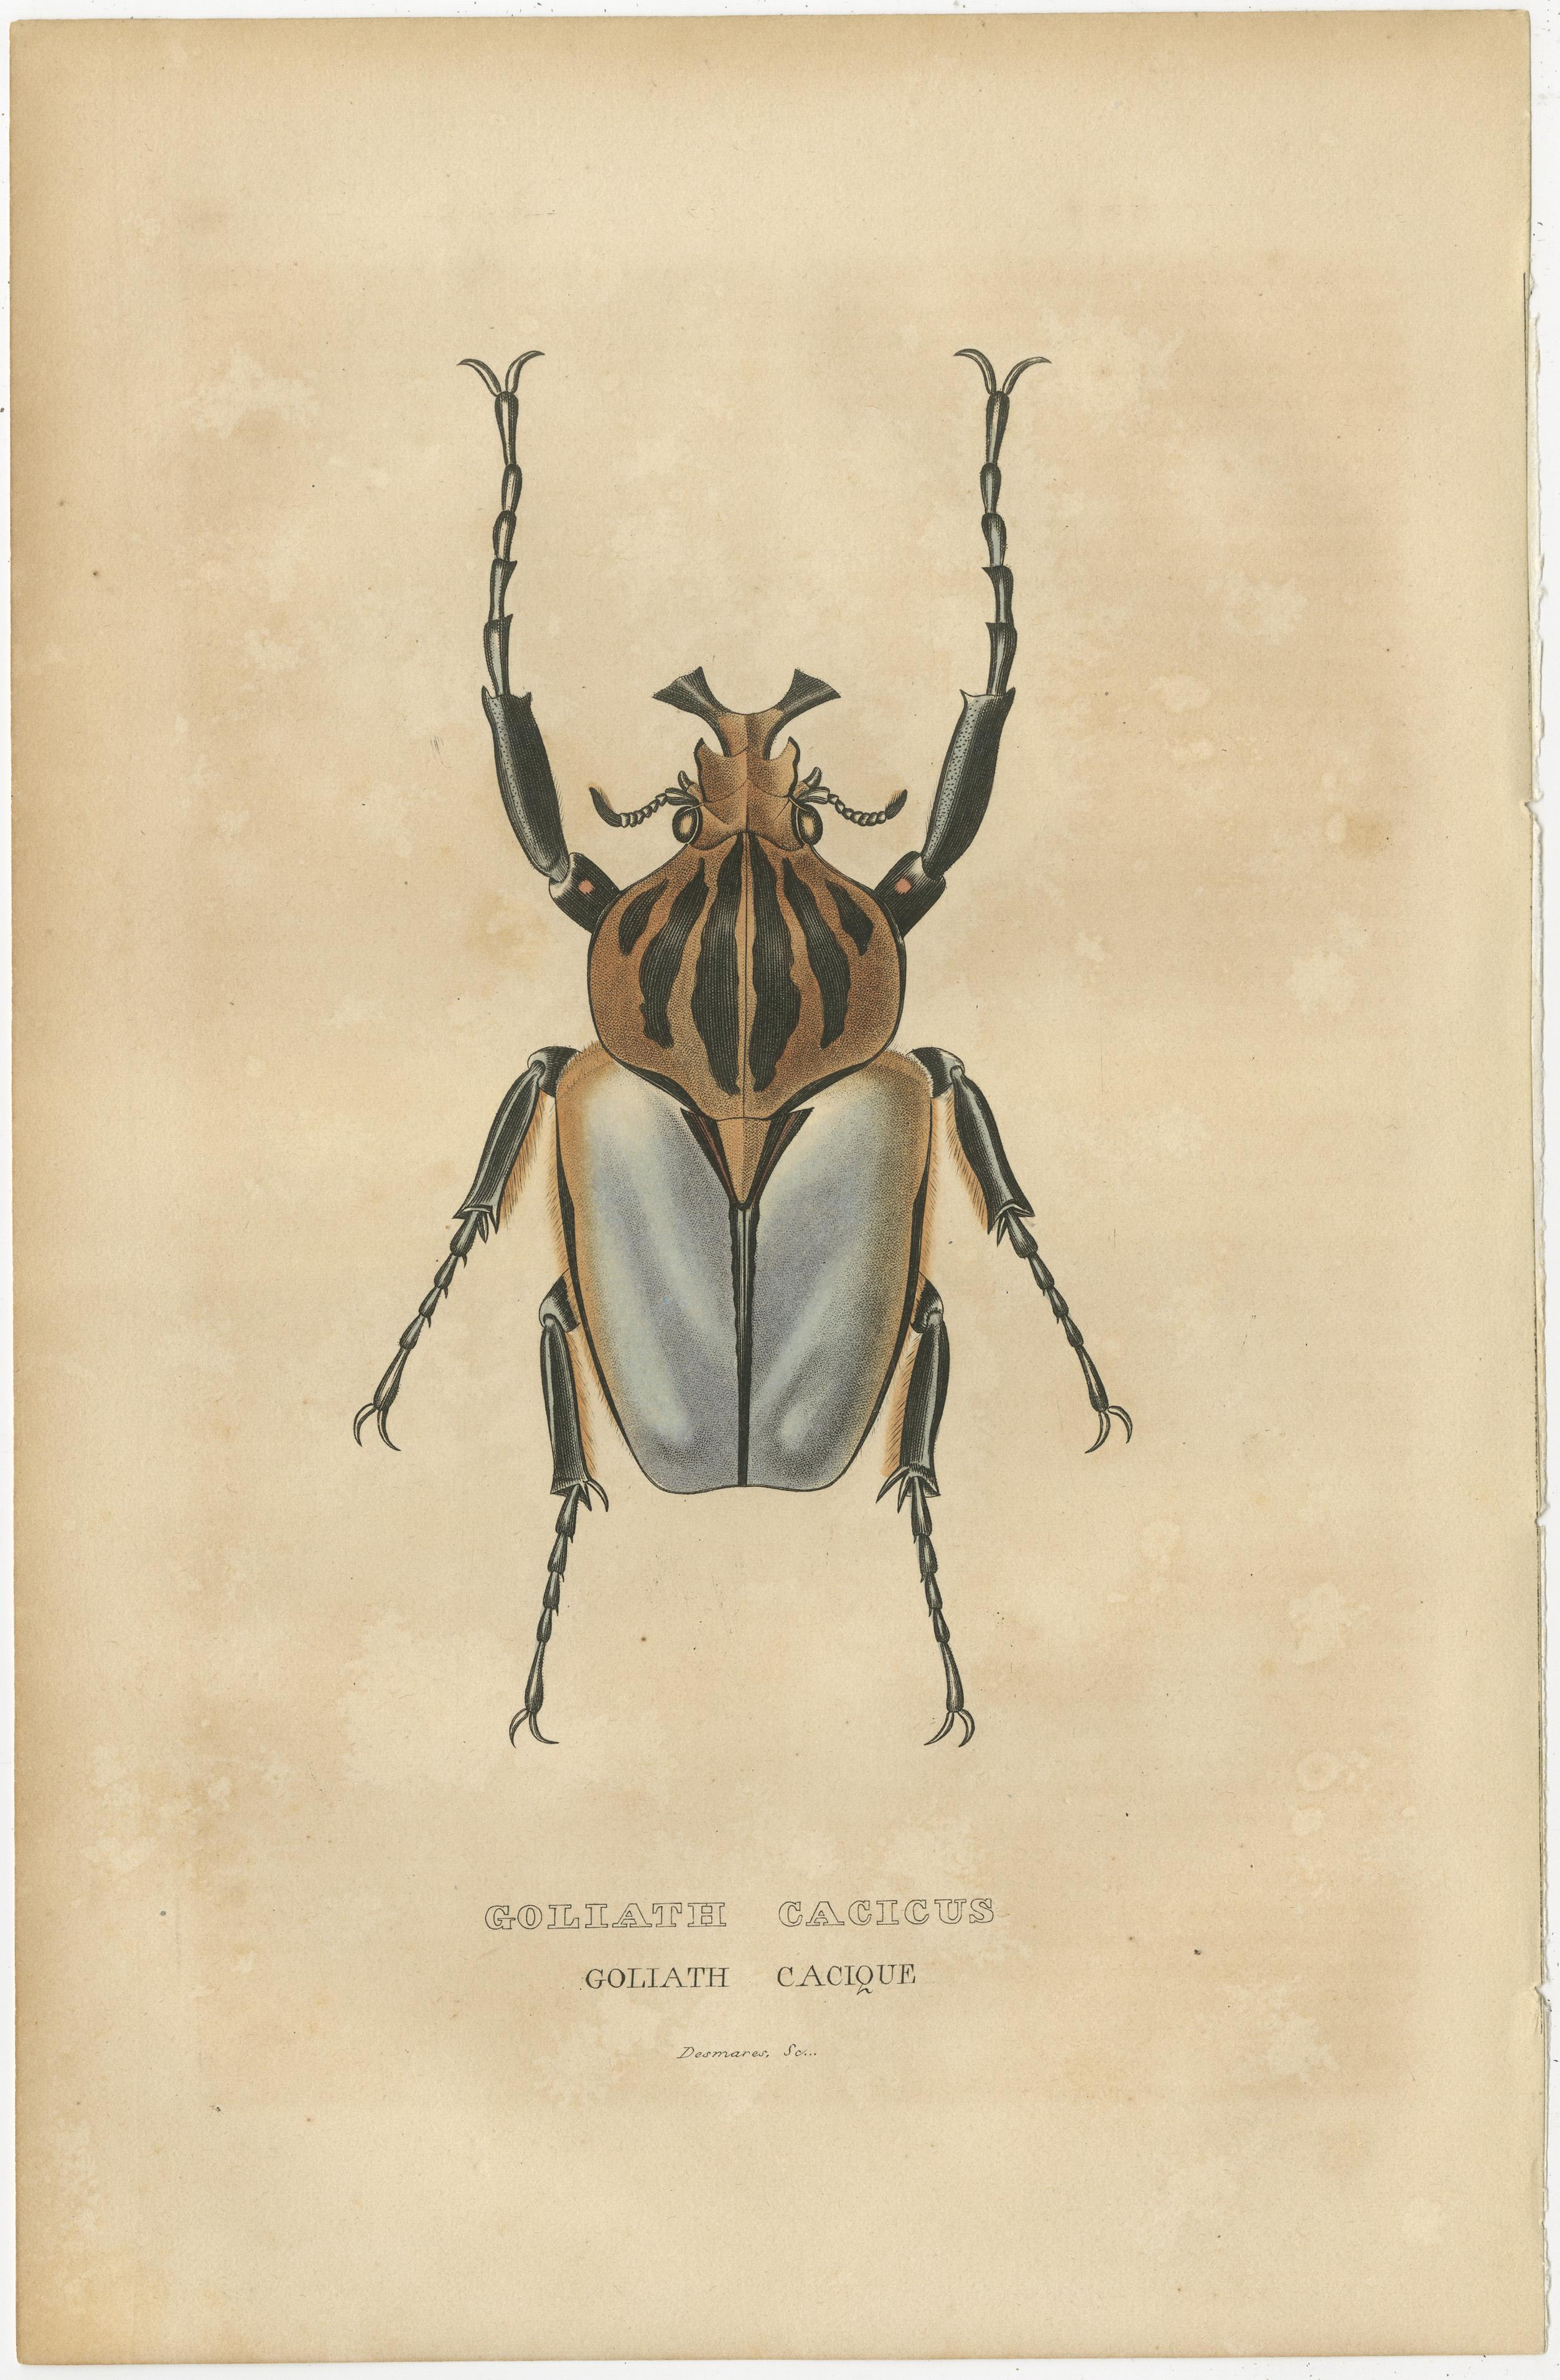 Engraved Beetles of the World: A Collection of Handcolored Engravings from 1845